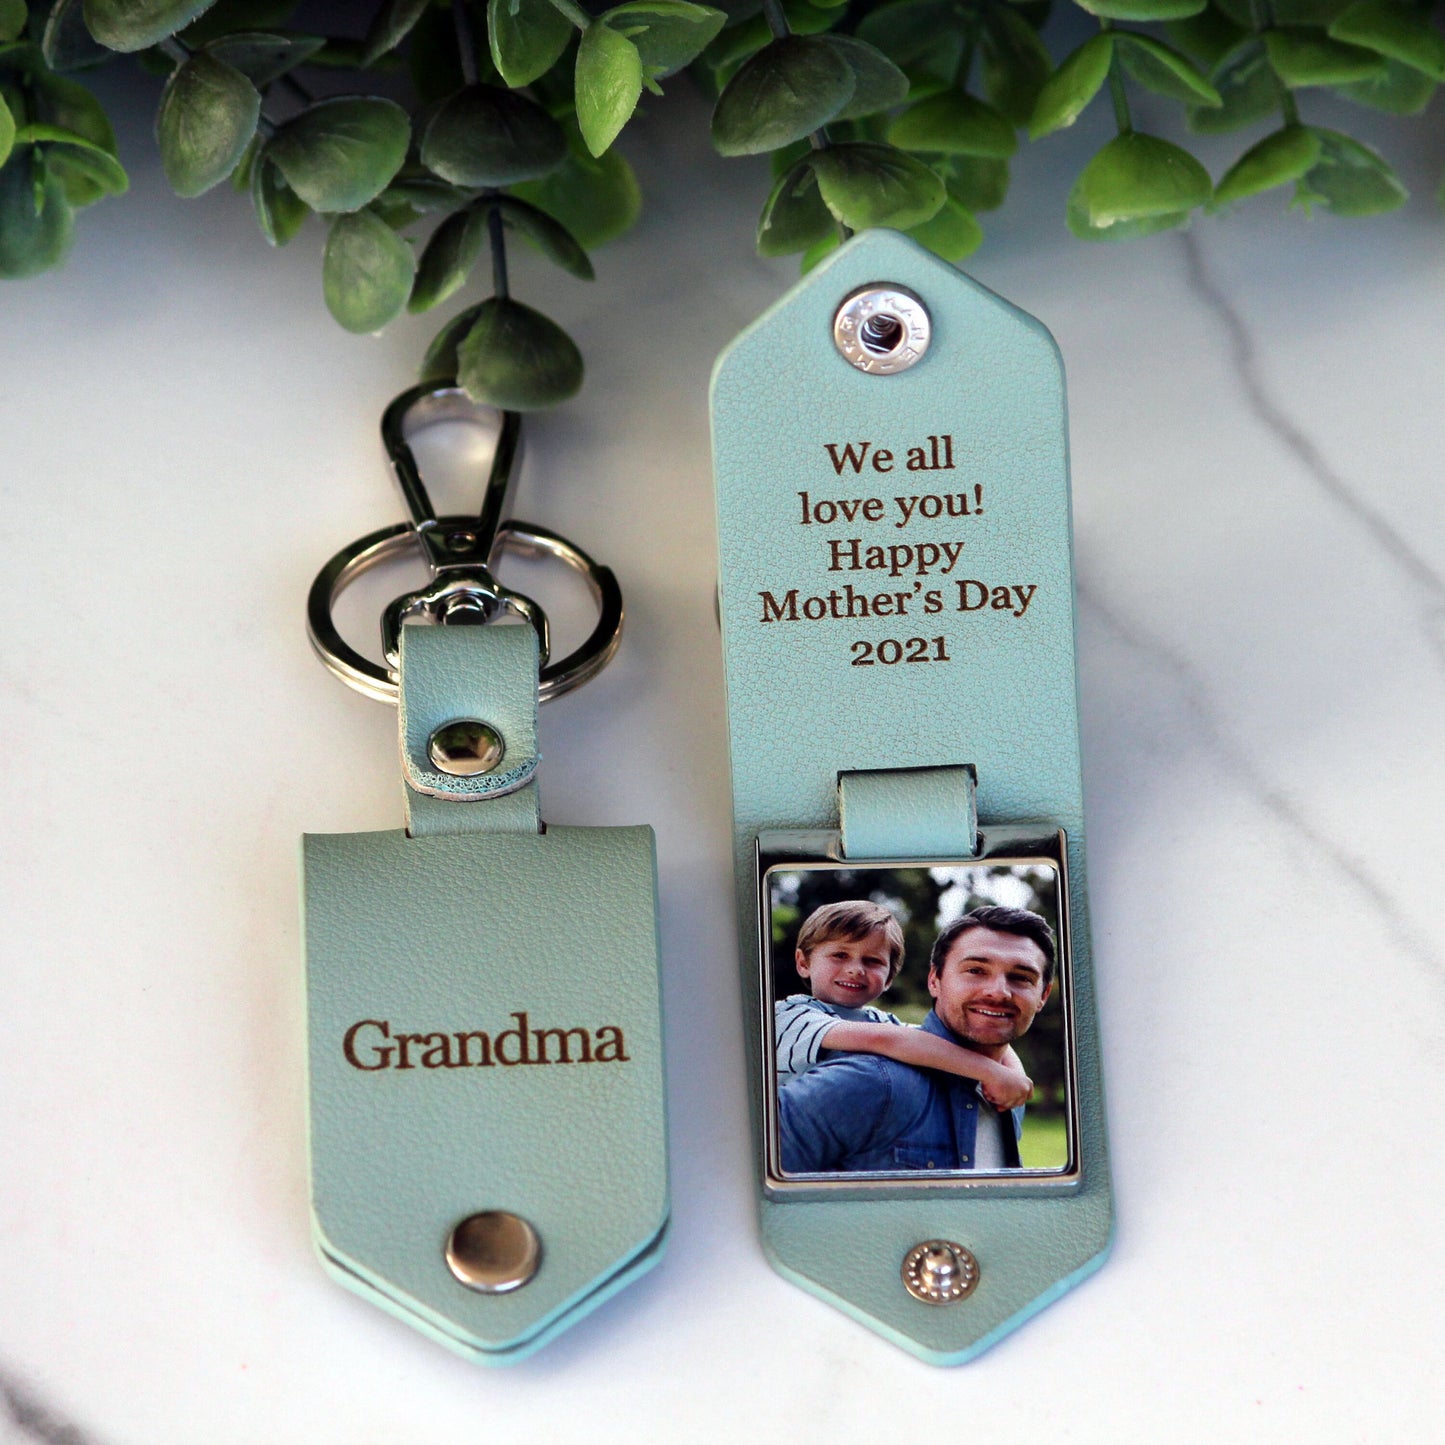 Personalized Photo Keychain, Double Sided Photo, Drive Safe Leather Keychain - Birthday, Anniversary, Wedding, Memorial, Handwritten Gift